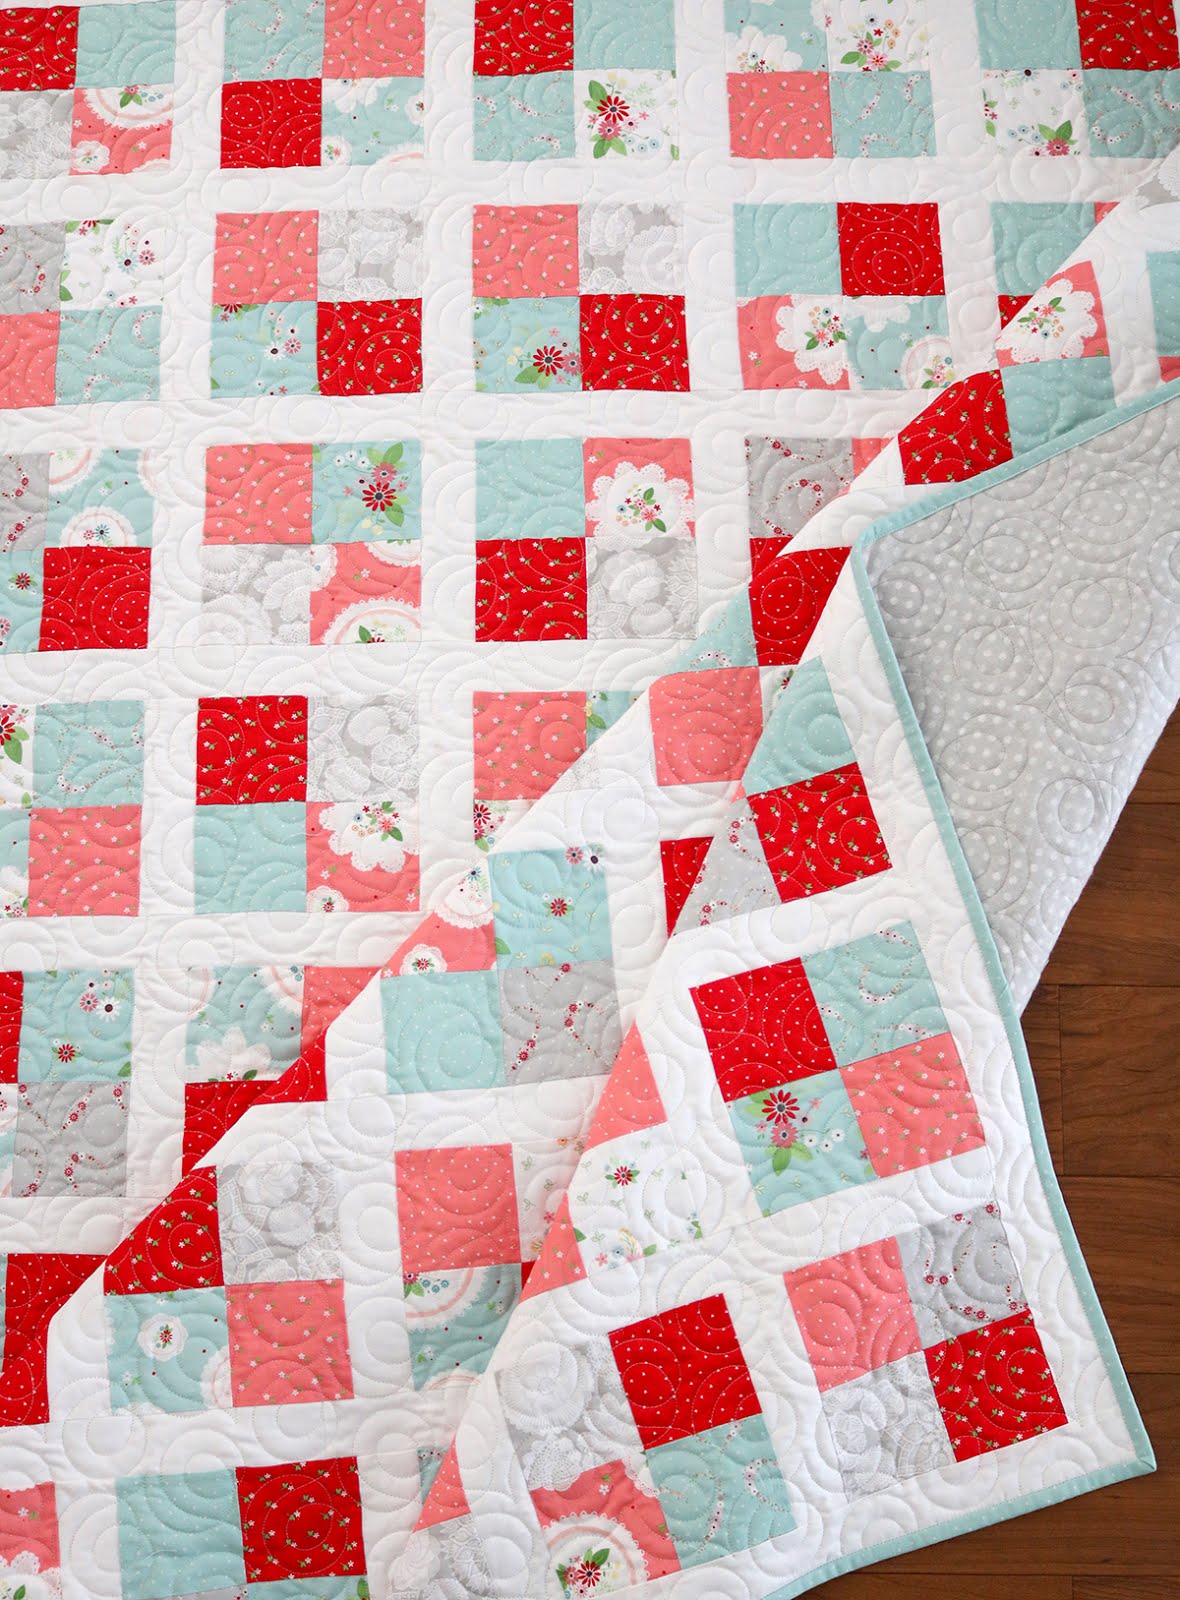 Designing A 4 Patch Baby Quilt